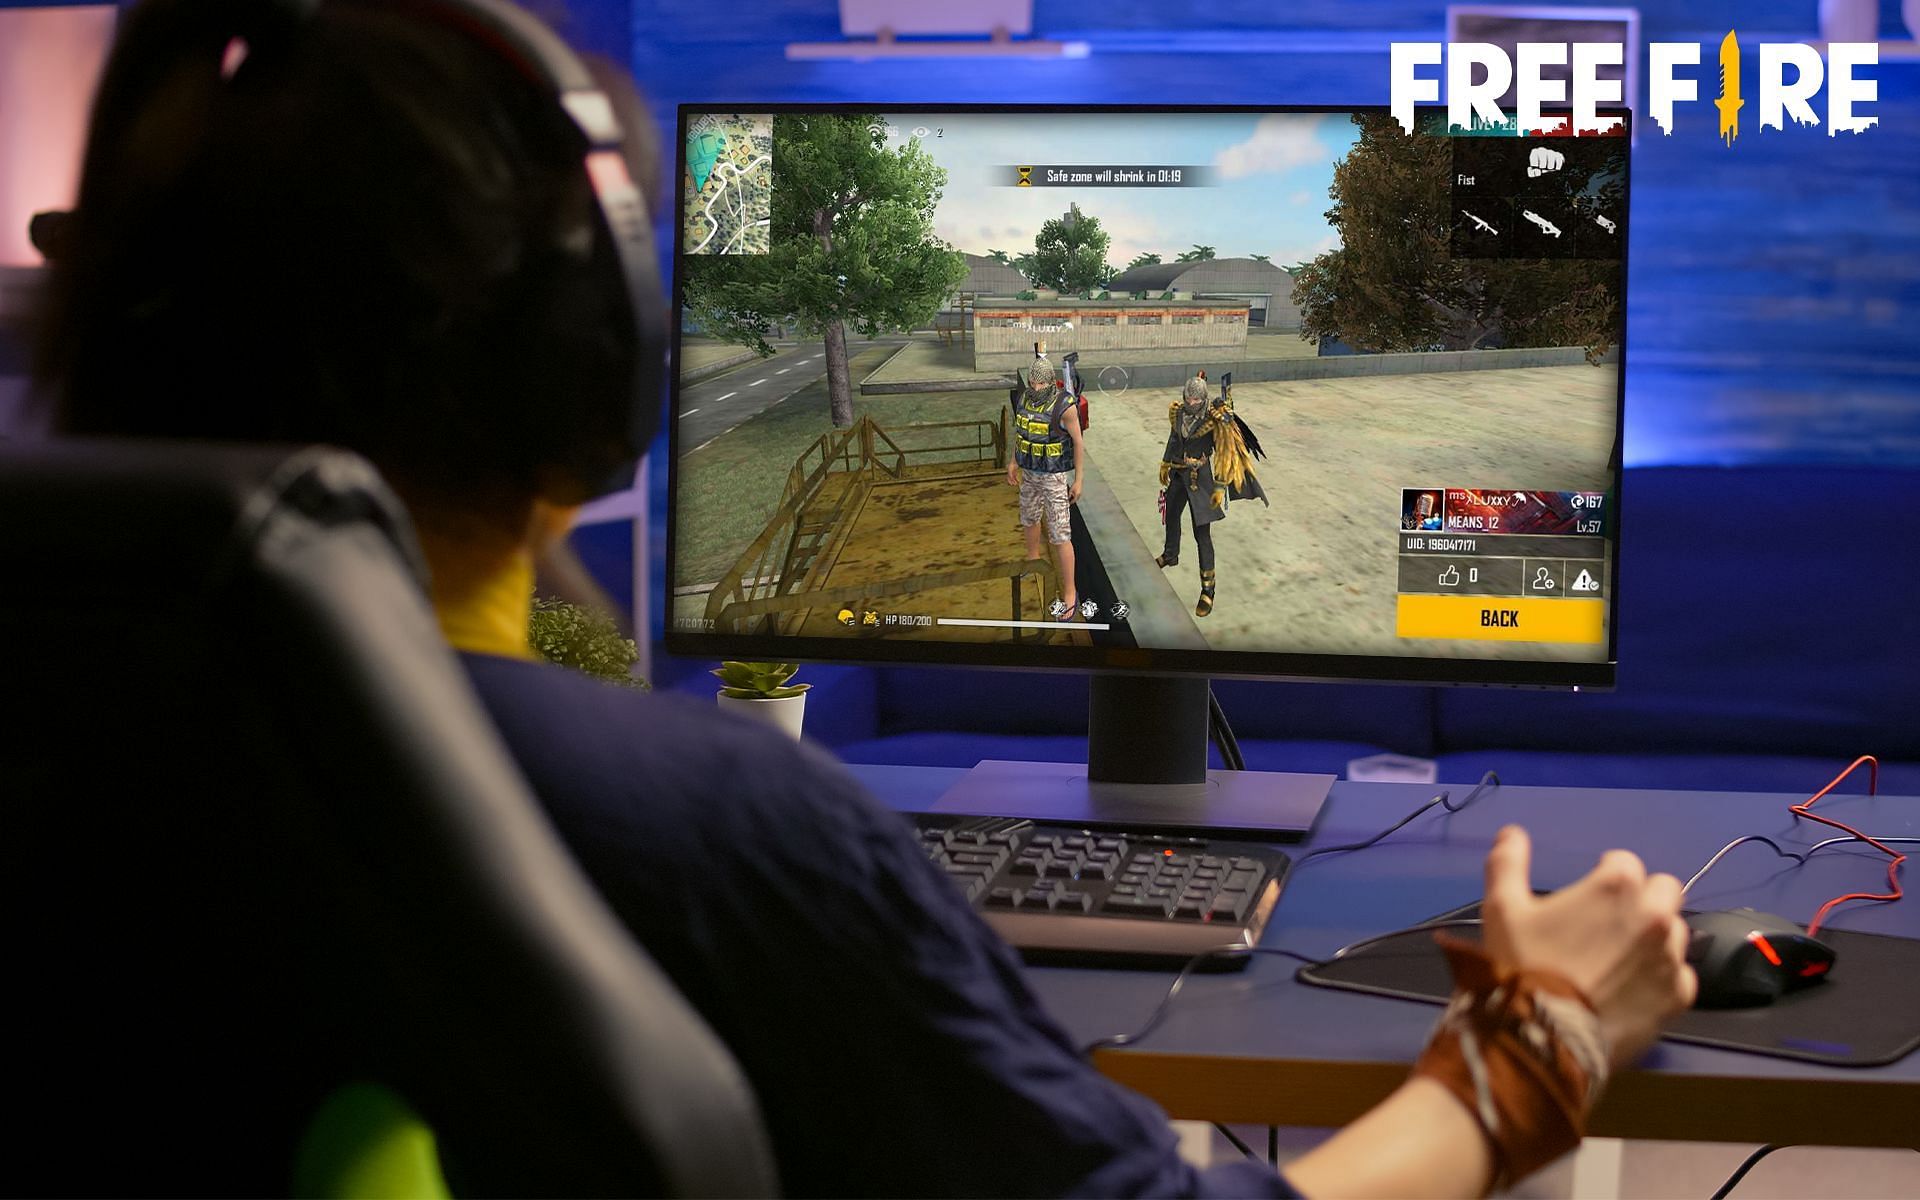 5 best emulators for playing Free Fire on Windows PC (2022)